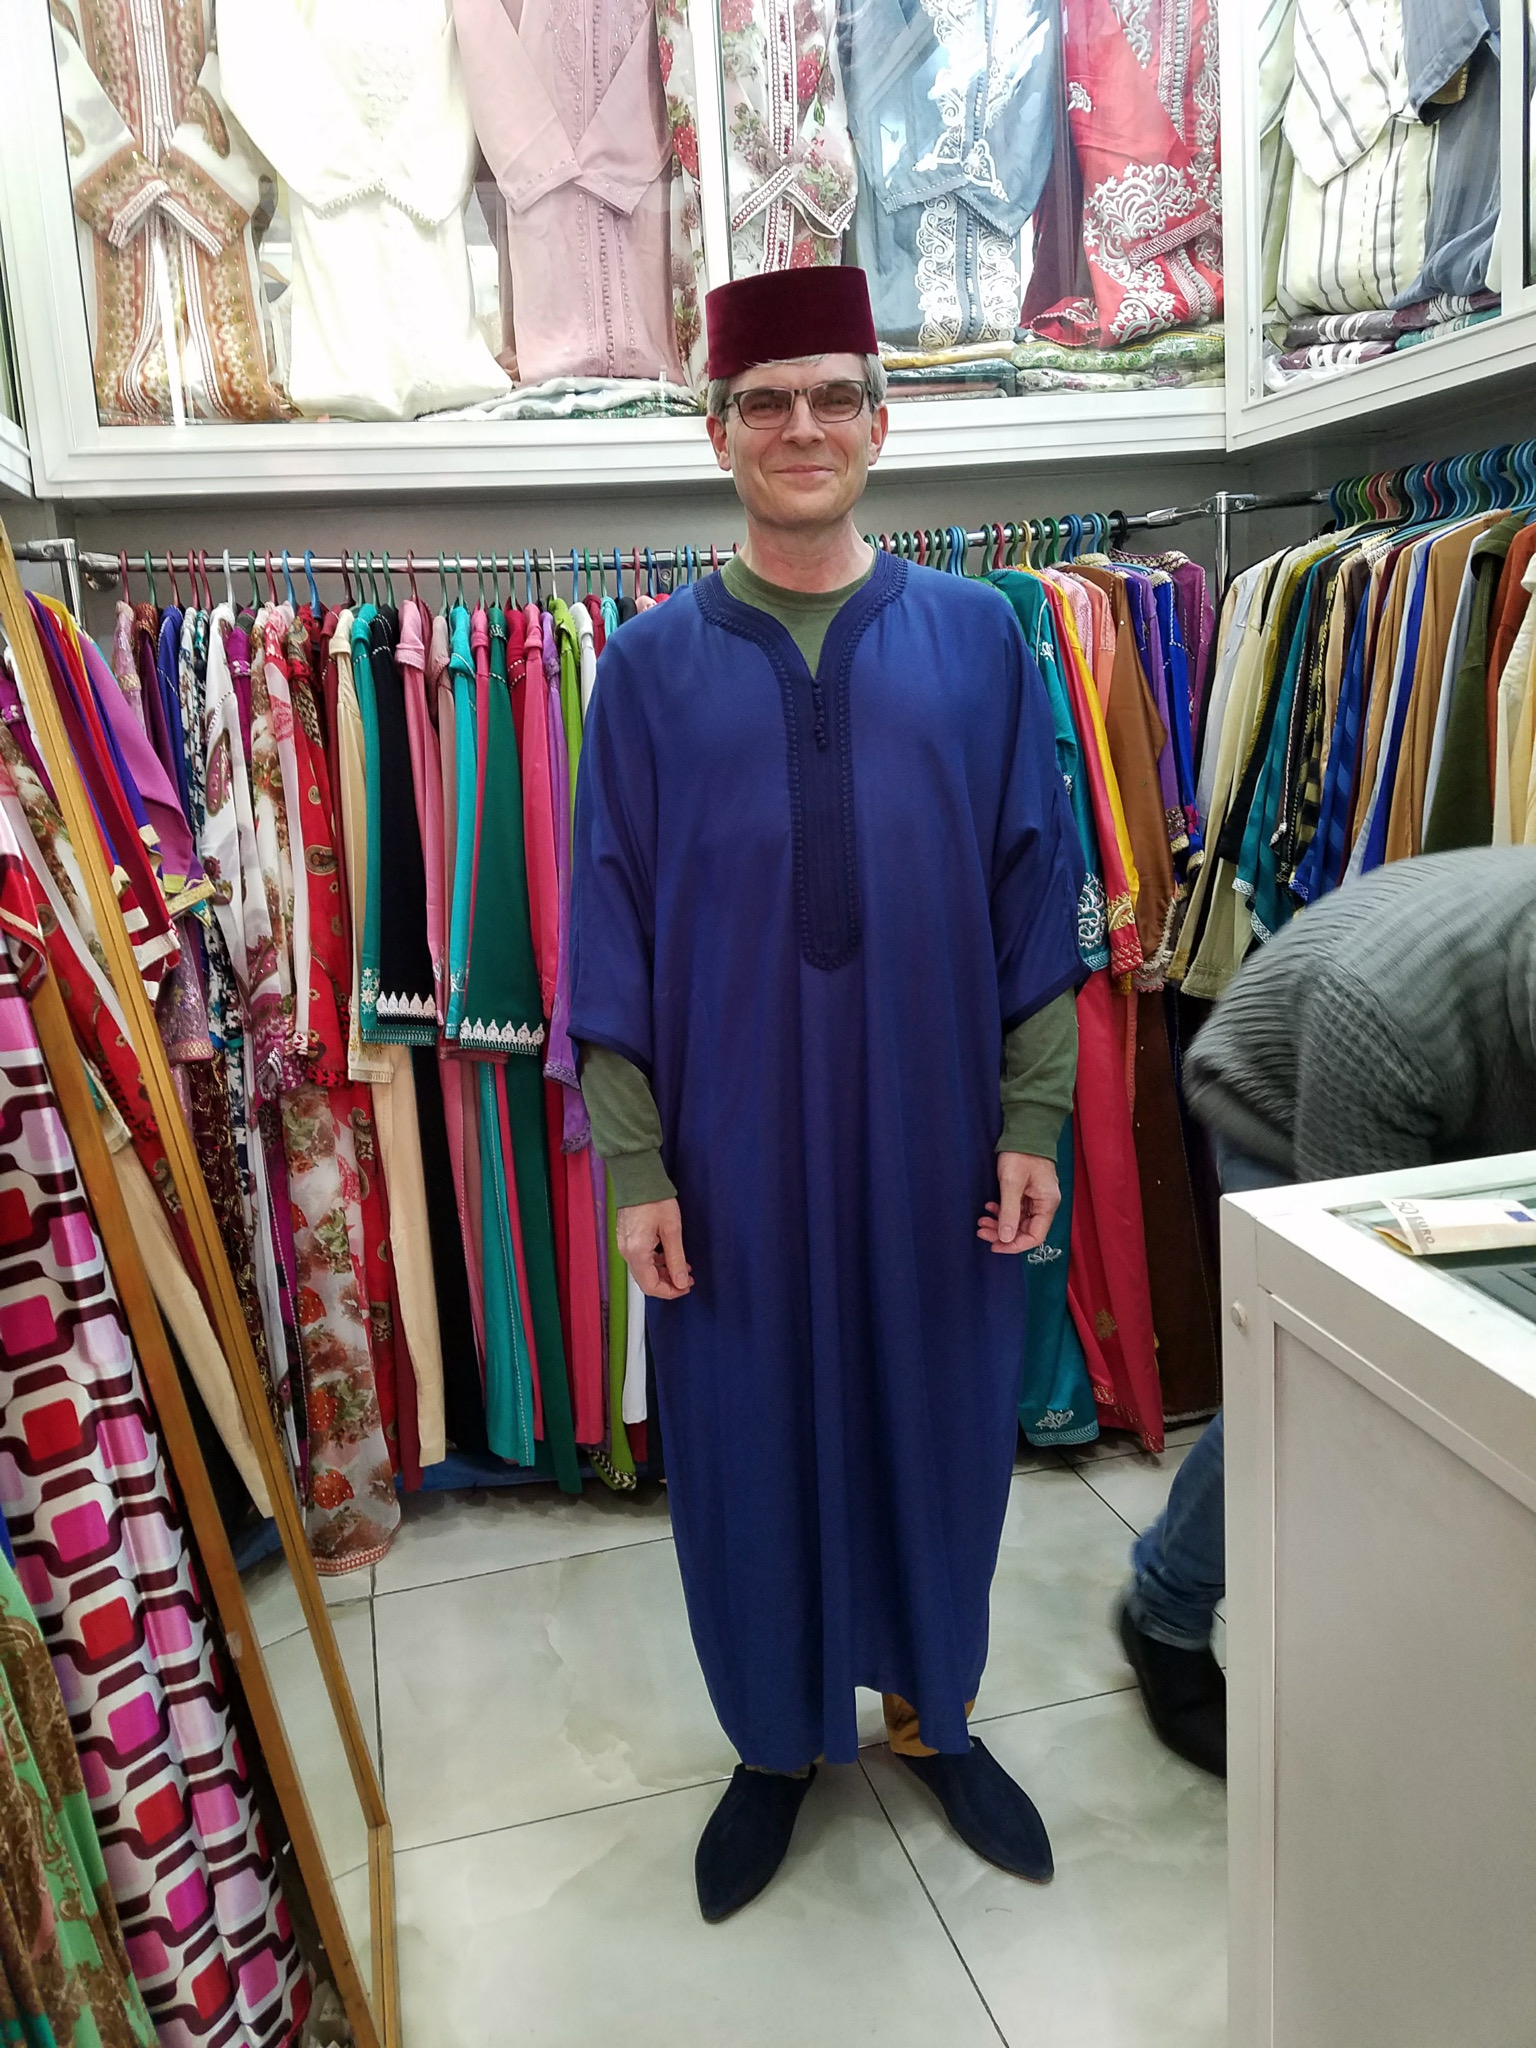 Me in fez, kaftan, and shoes